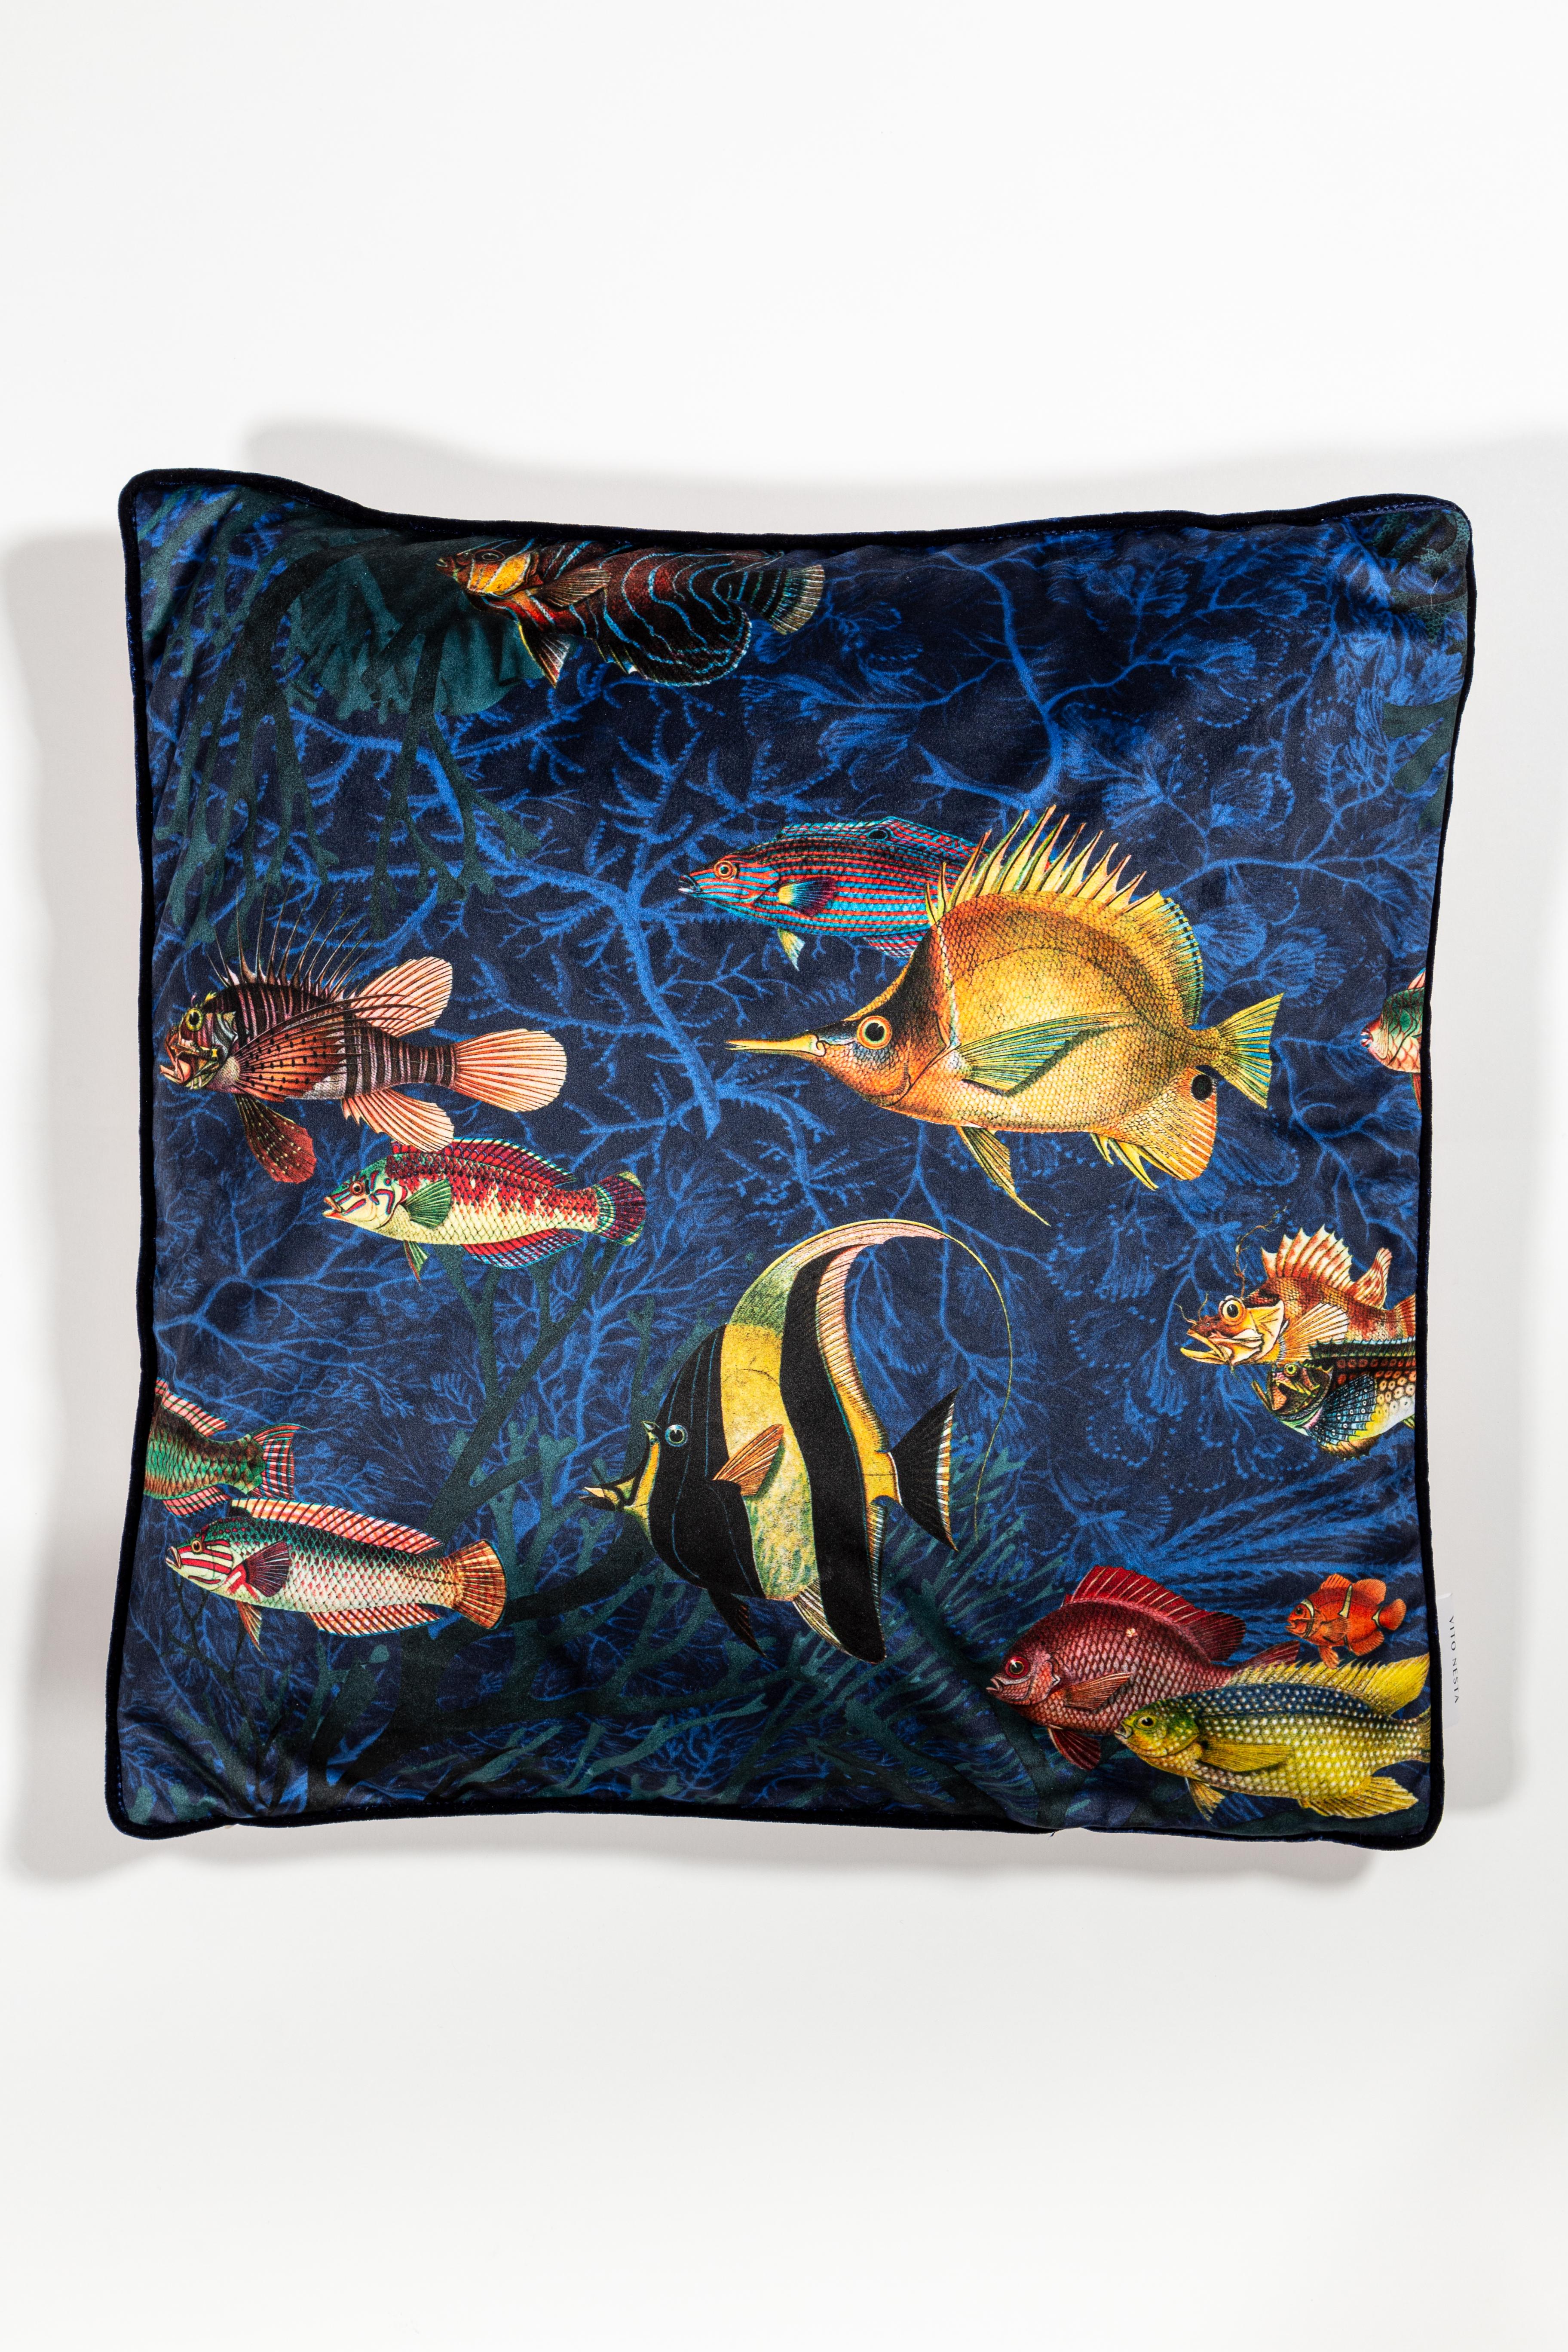 Amami pillows is a set of cushions inspired by the coral reef of the Amami Islands, near Japan. This coral reef has recently bleached, these pillows wants to be a remind of how powerful and beautiful the underwater world is when is healthy and